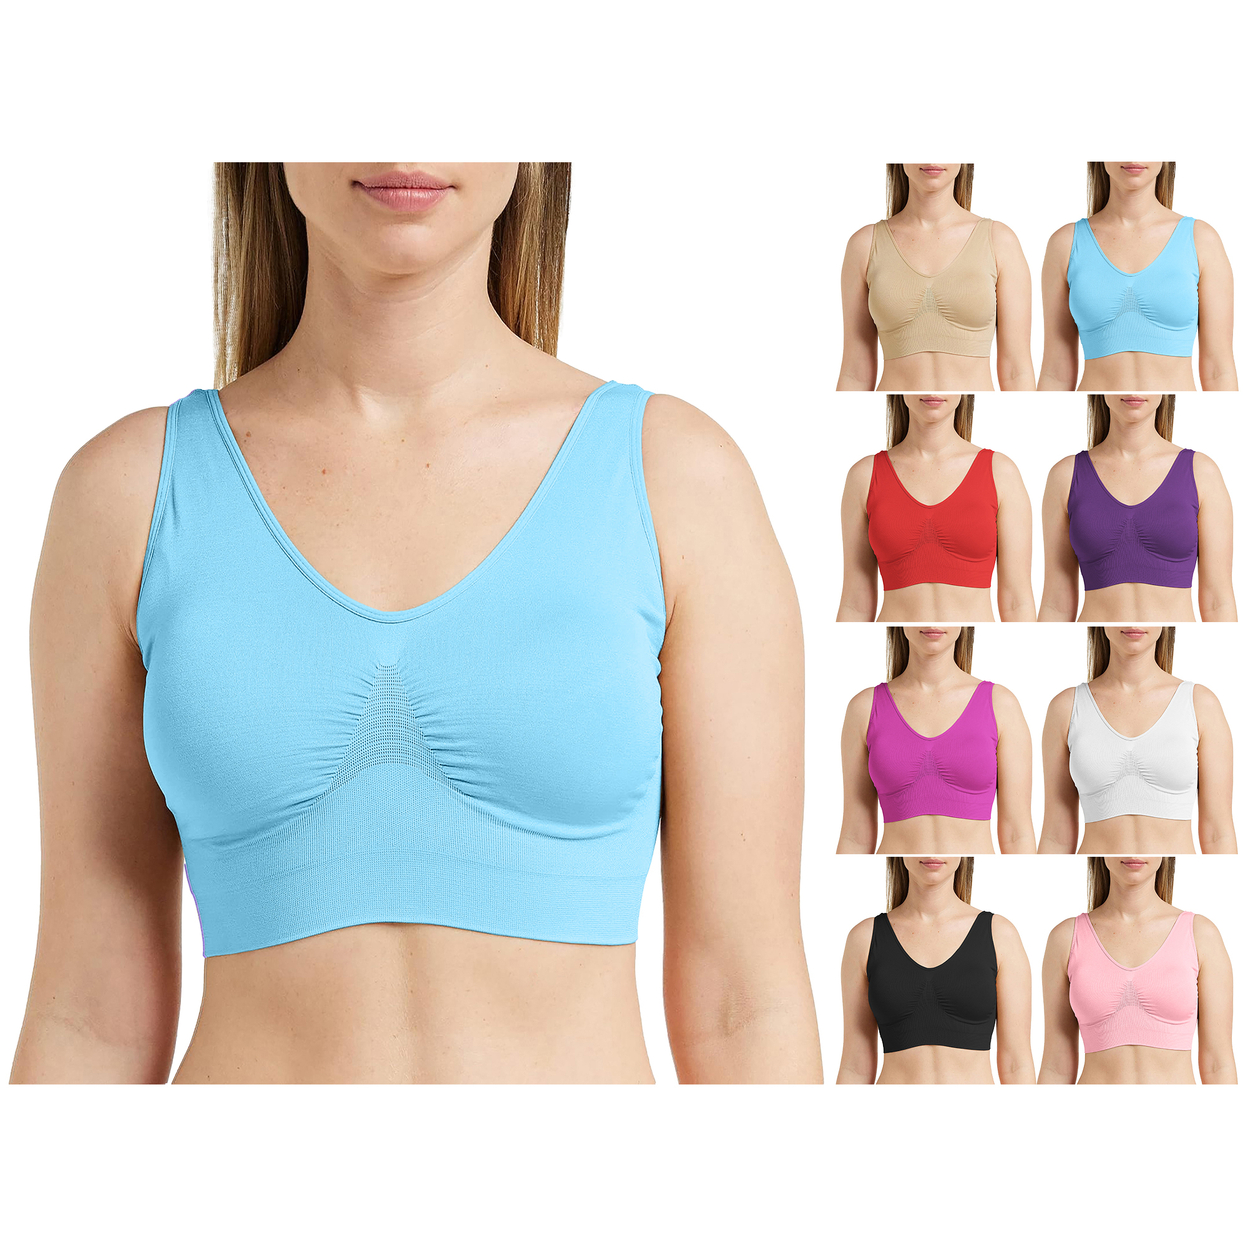 5-Pack: Women's Comfortable Scoopneck Stretch Seamless Yoga Workout Active Bra - Large